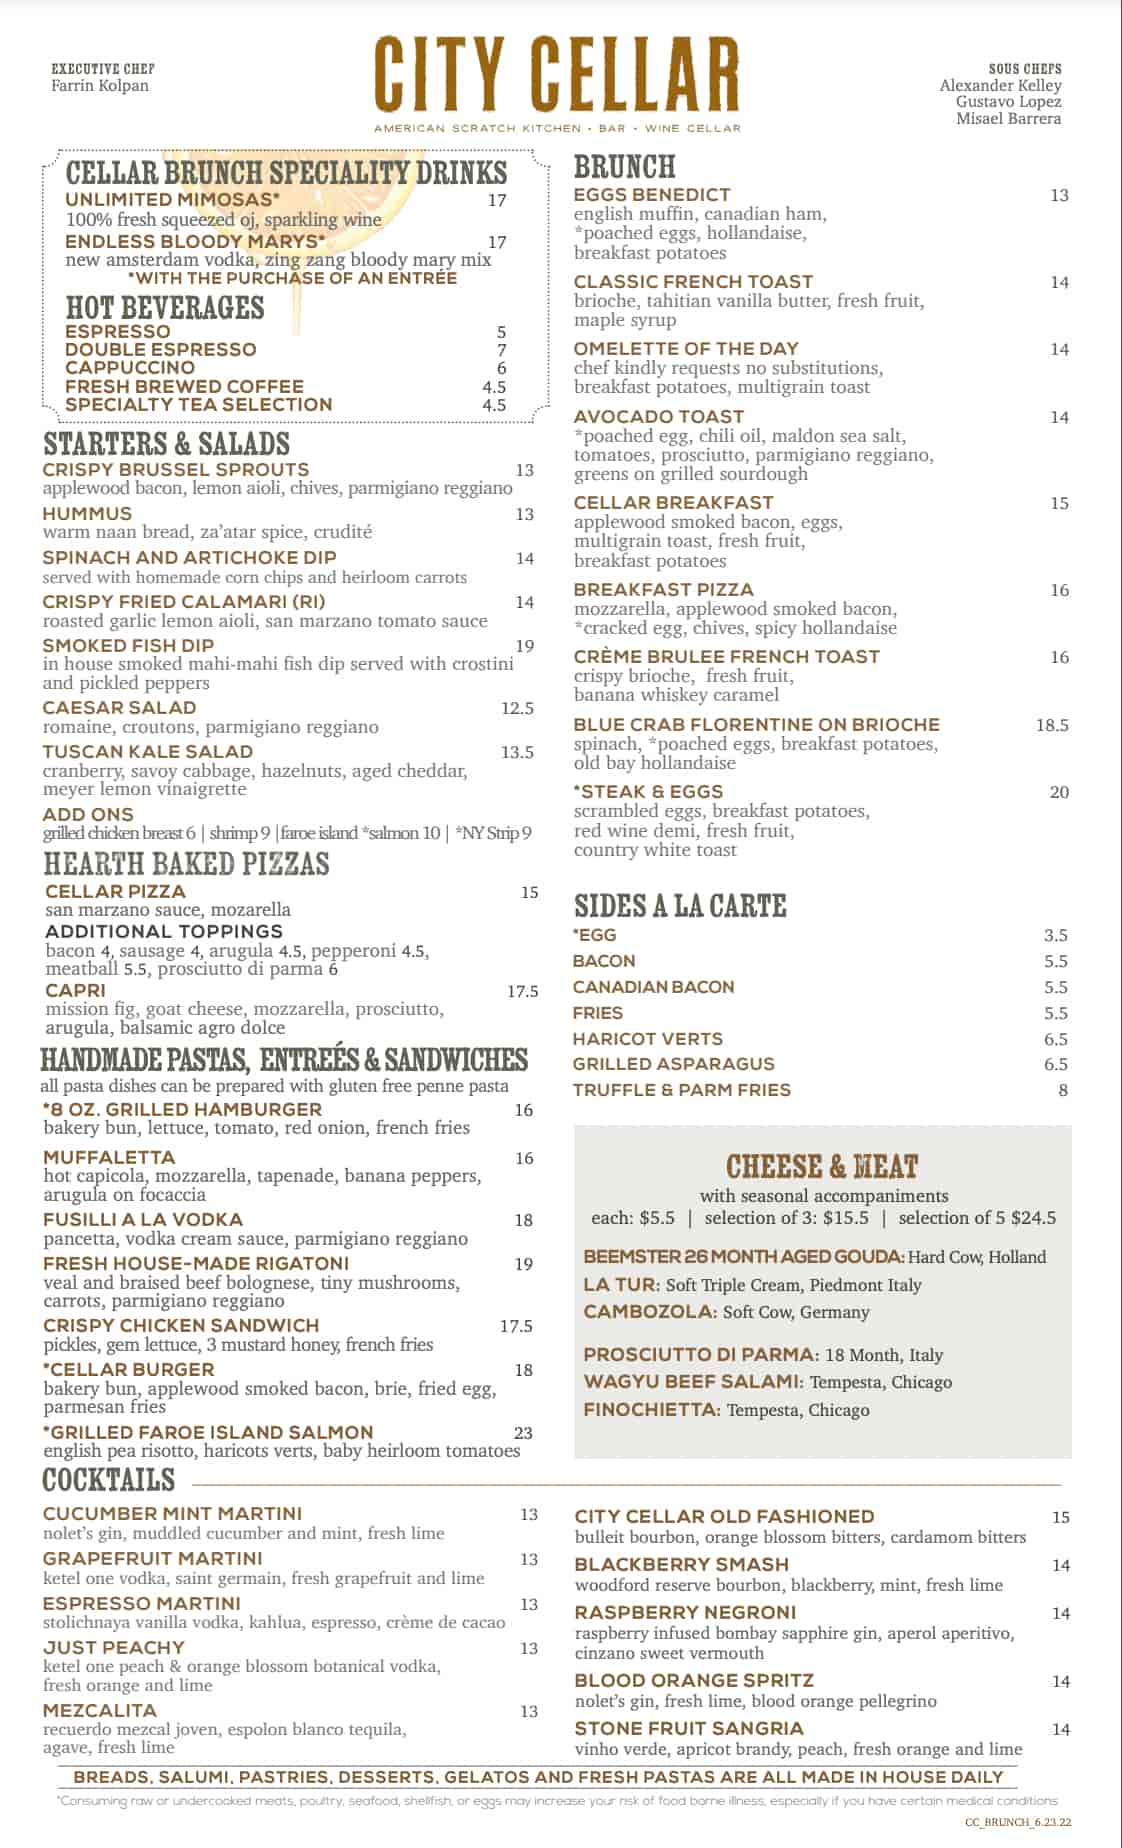 City Cellar Wine Bar and Grill Menu With Prices